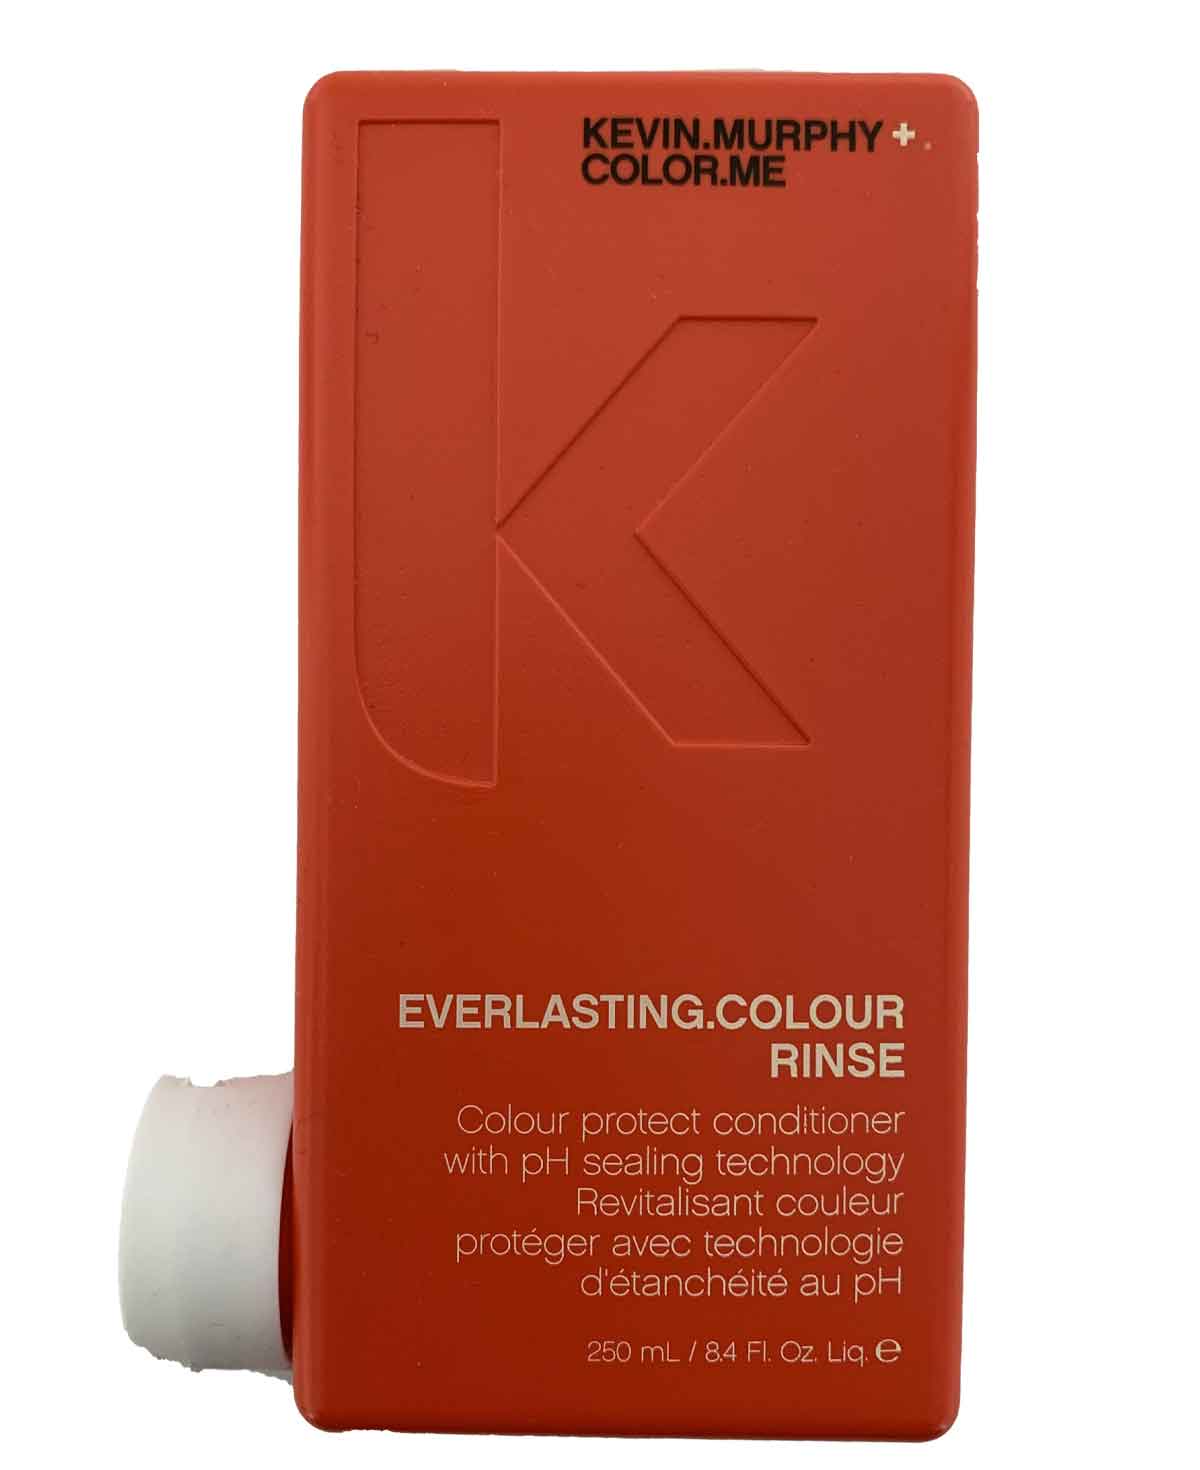 Kevin.Murphy EVERLASTING.COLOUR RINSE 250ml